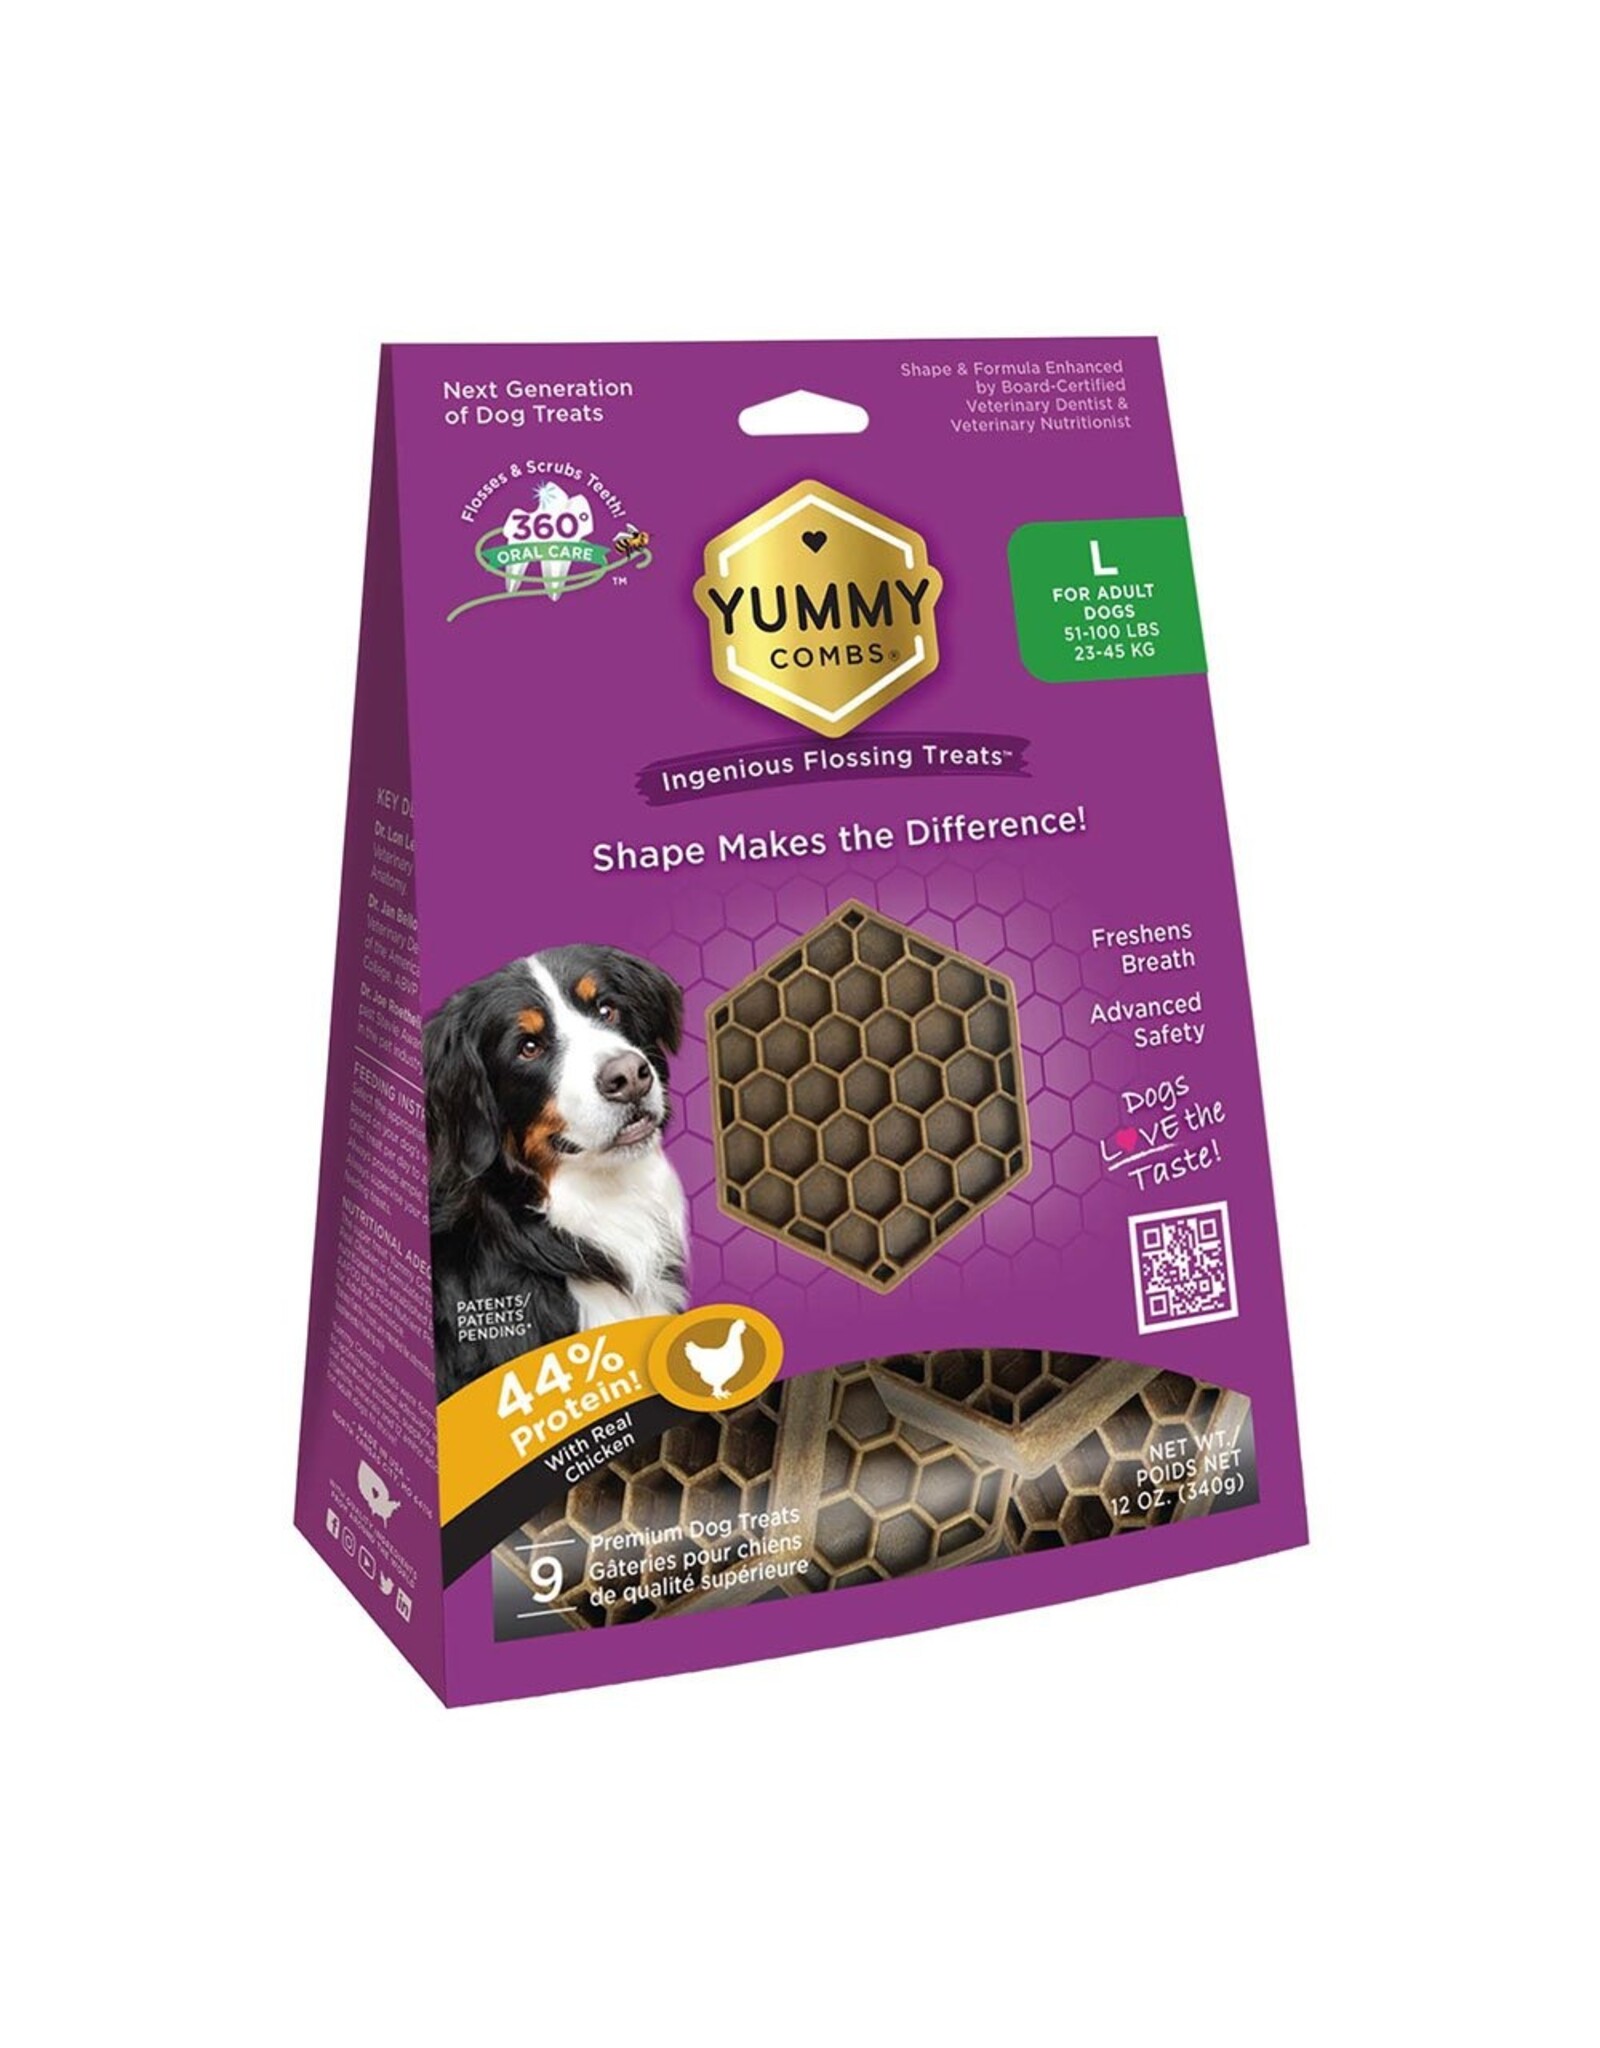 Yummy Combs Yummy Combs Pack 51-100lbs